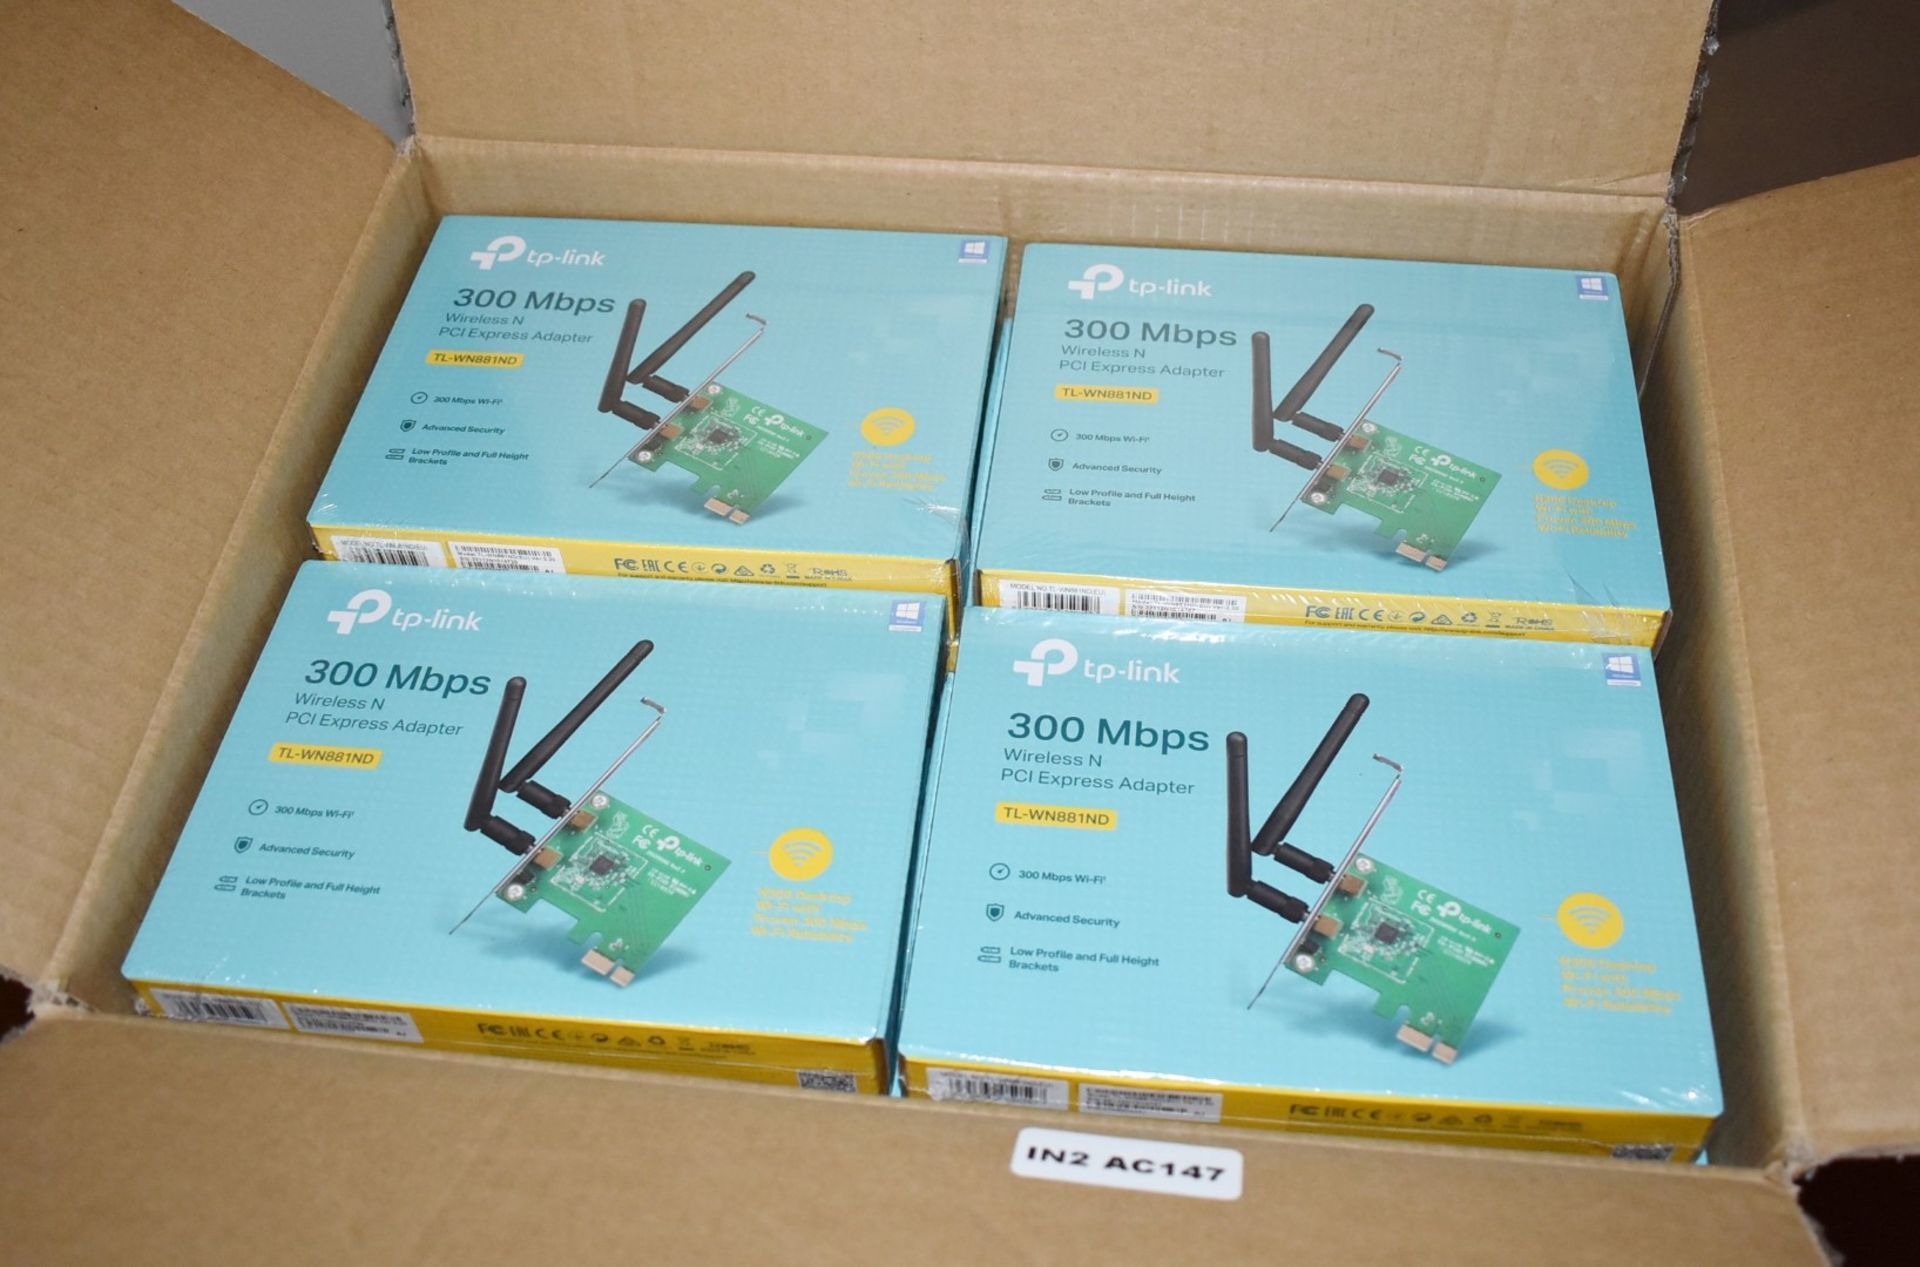 5 x TP-Link TL-WN881ND 300mbps Wireless N Pci Express Adapters - New Boxed Stock - RRP £80 - Image 2 of 4